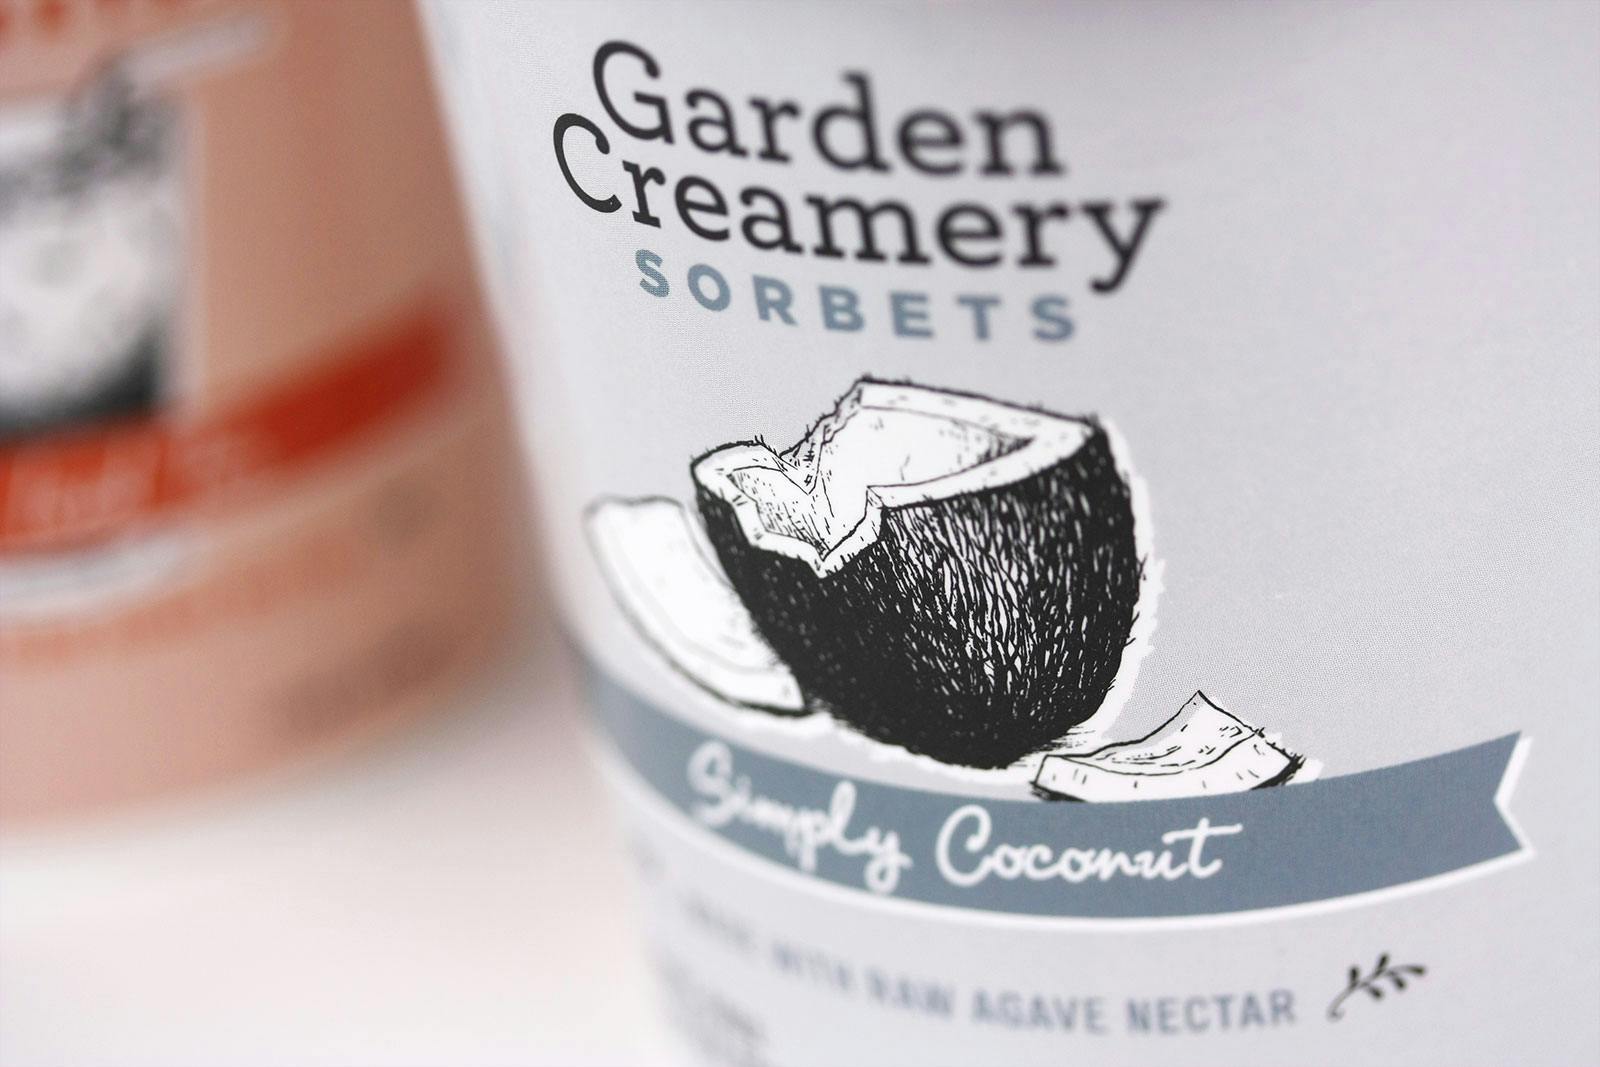 Garden Creamery Sorbets packaging in various flavours zoomed in on Simply Coconut